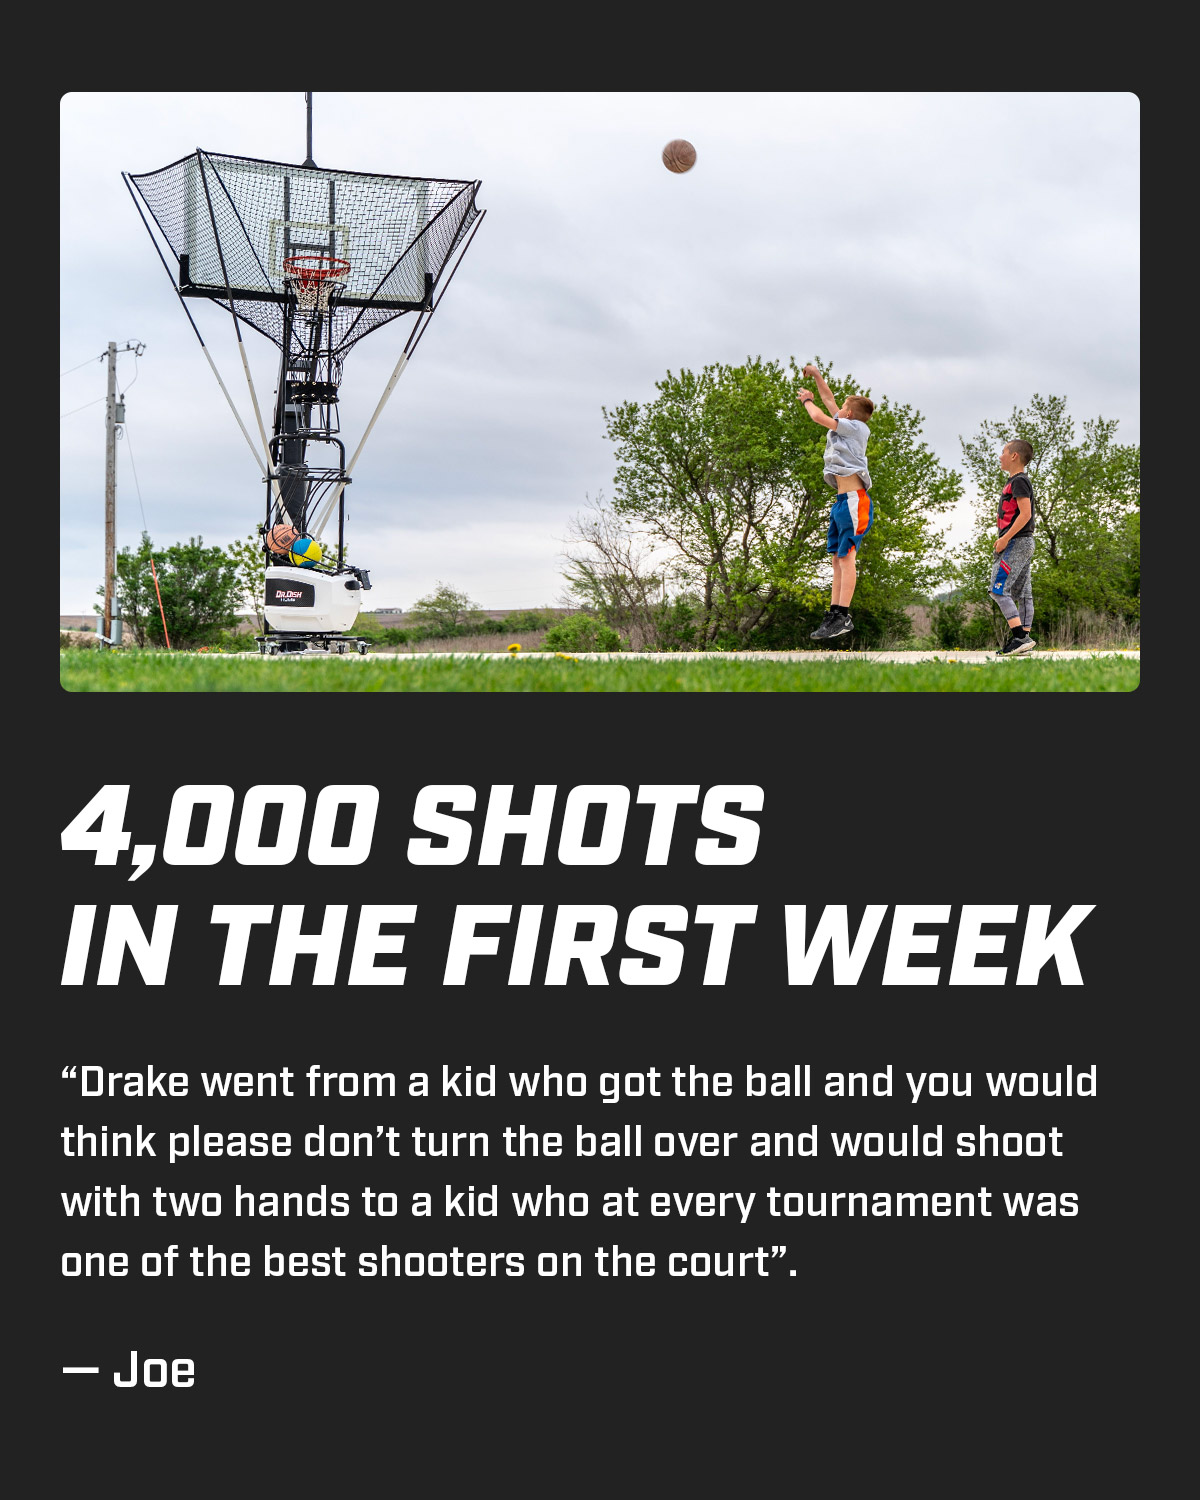 4,000 Shots in the First Week